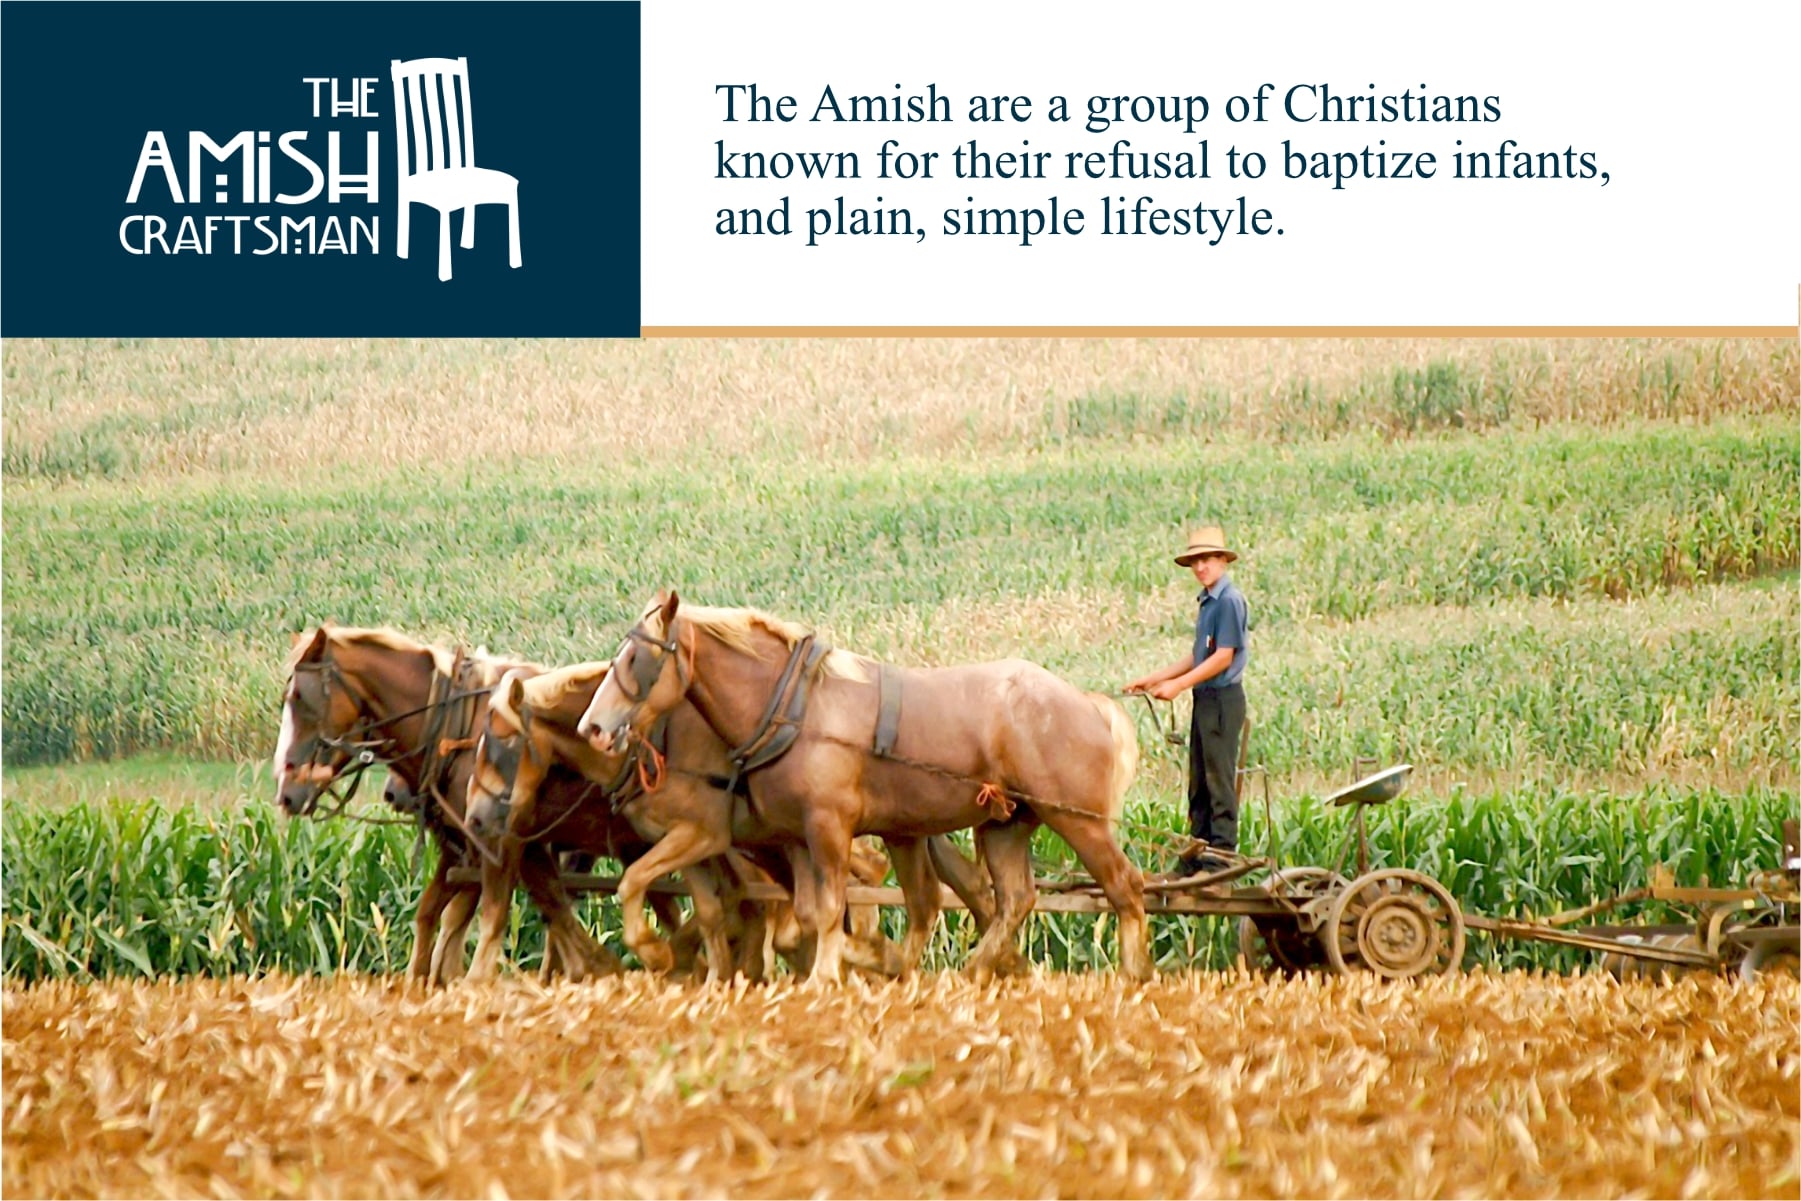 The Amish are known for their plain lifestyle